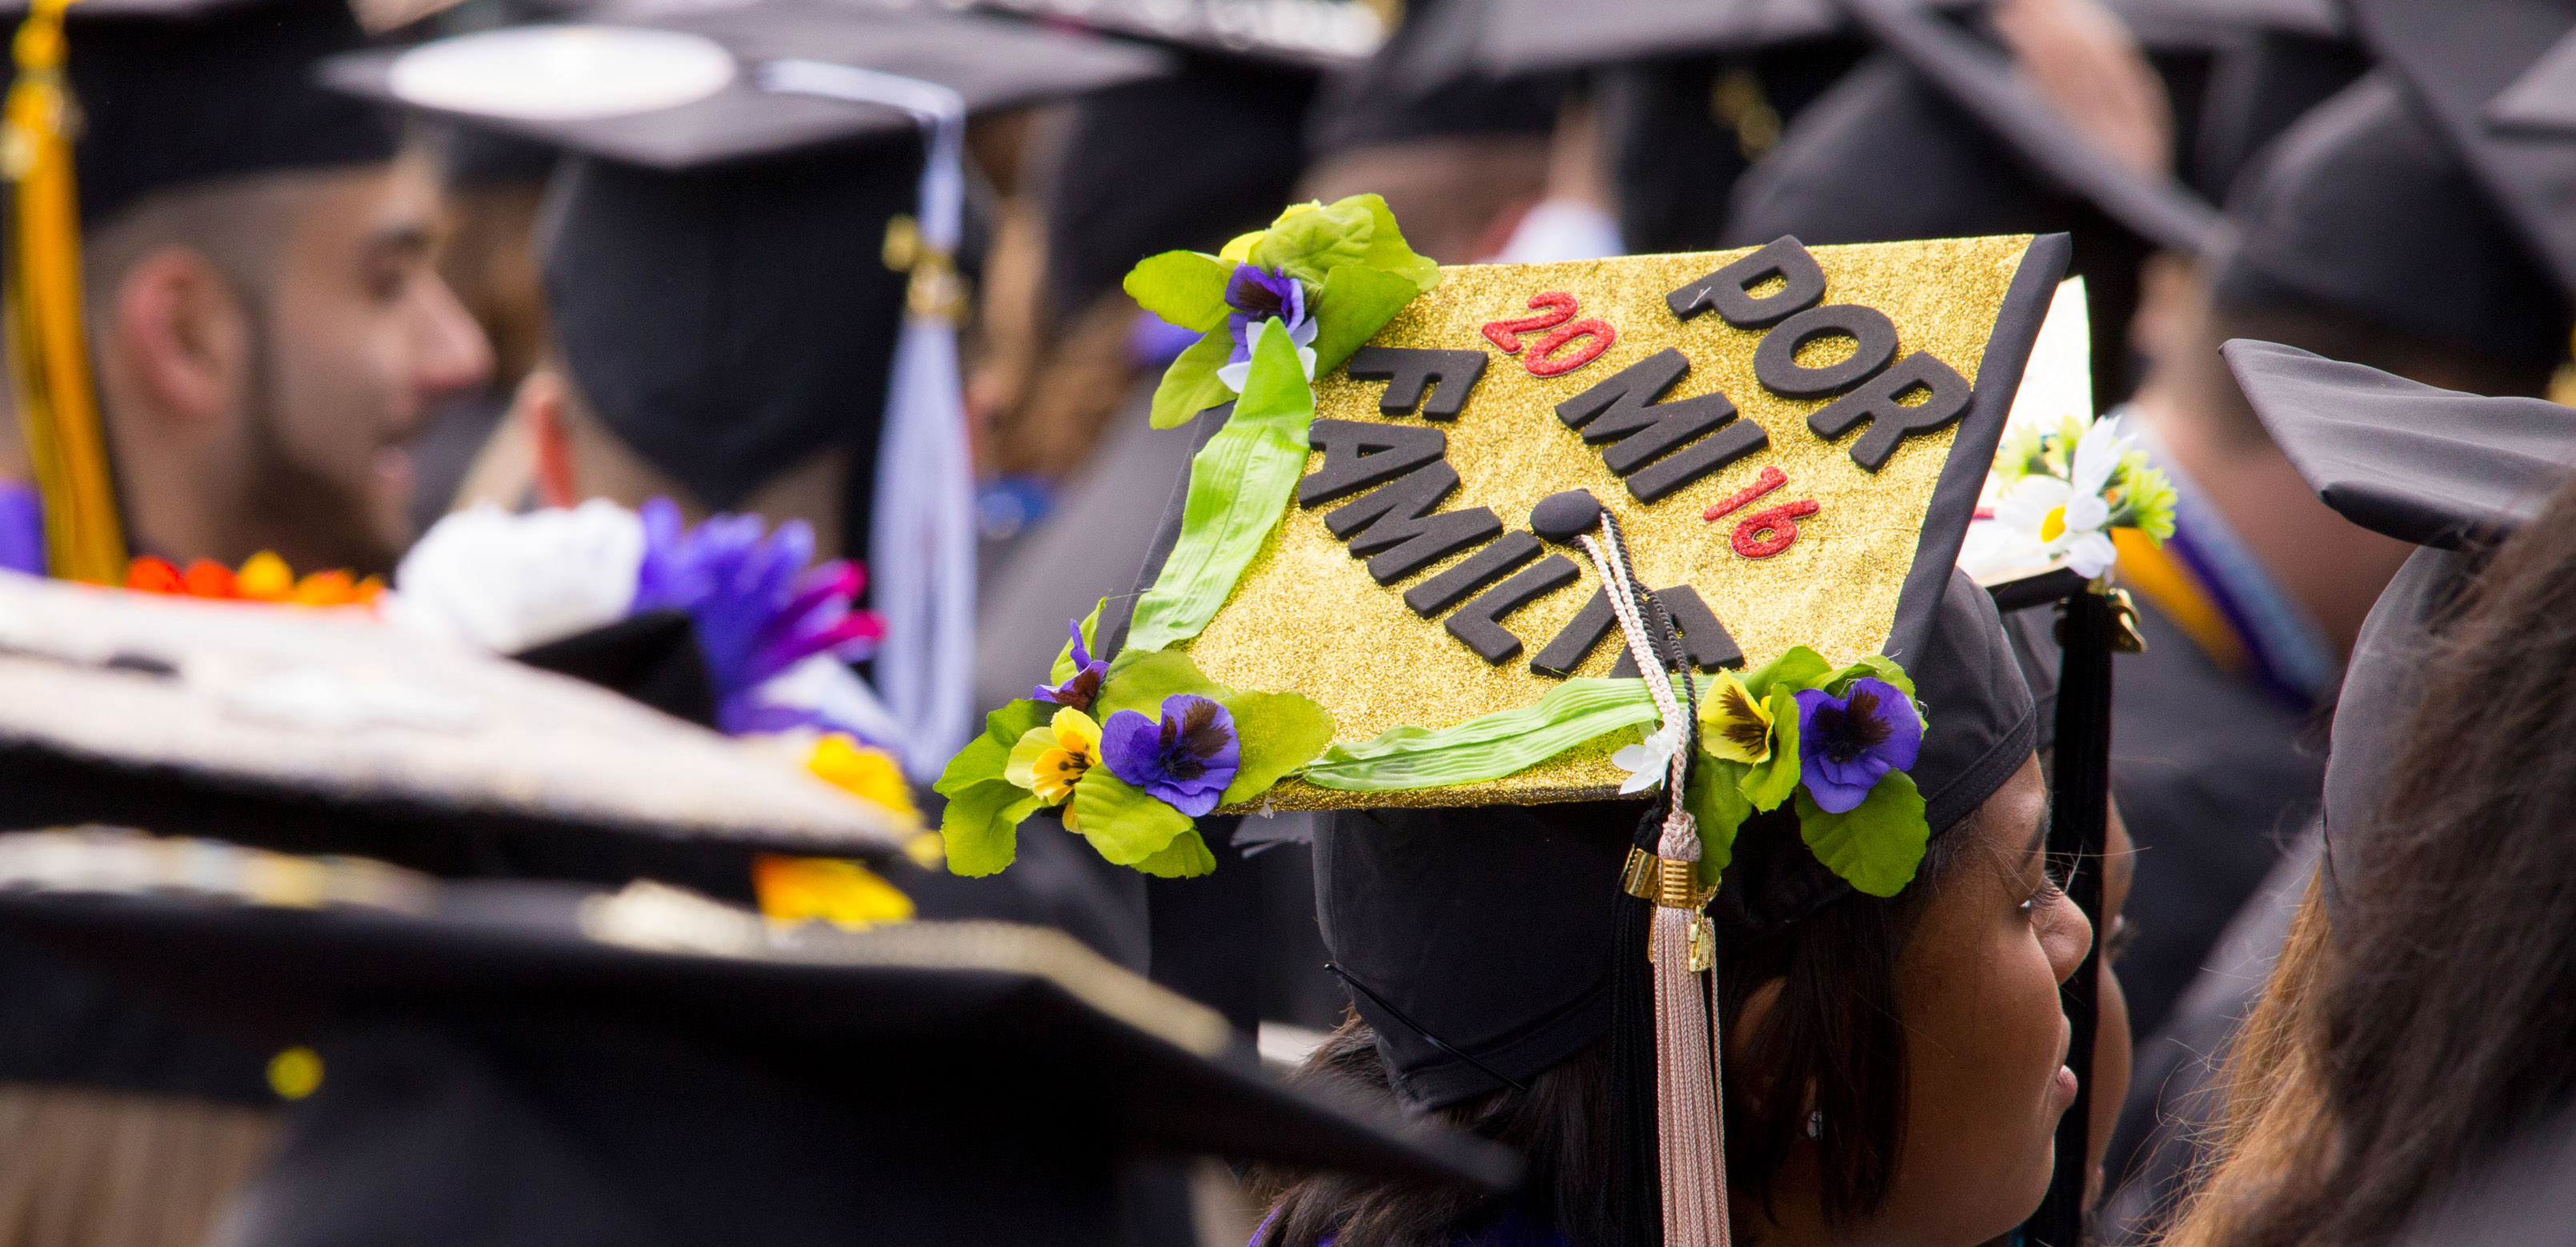 A student's graduation cap decorated with the words "Por Mi Familia" and "2016" against a gold background with purple and yellow flowers.